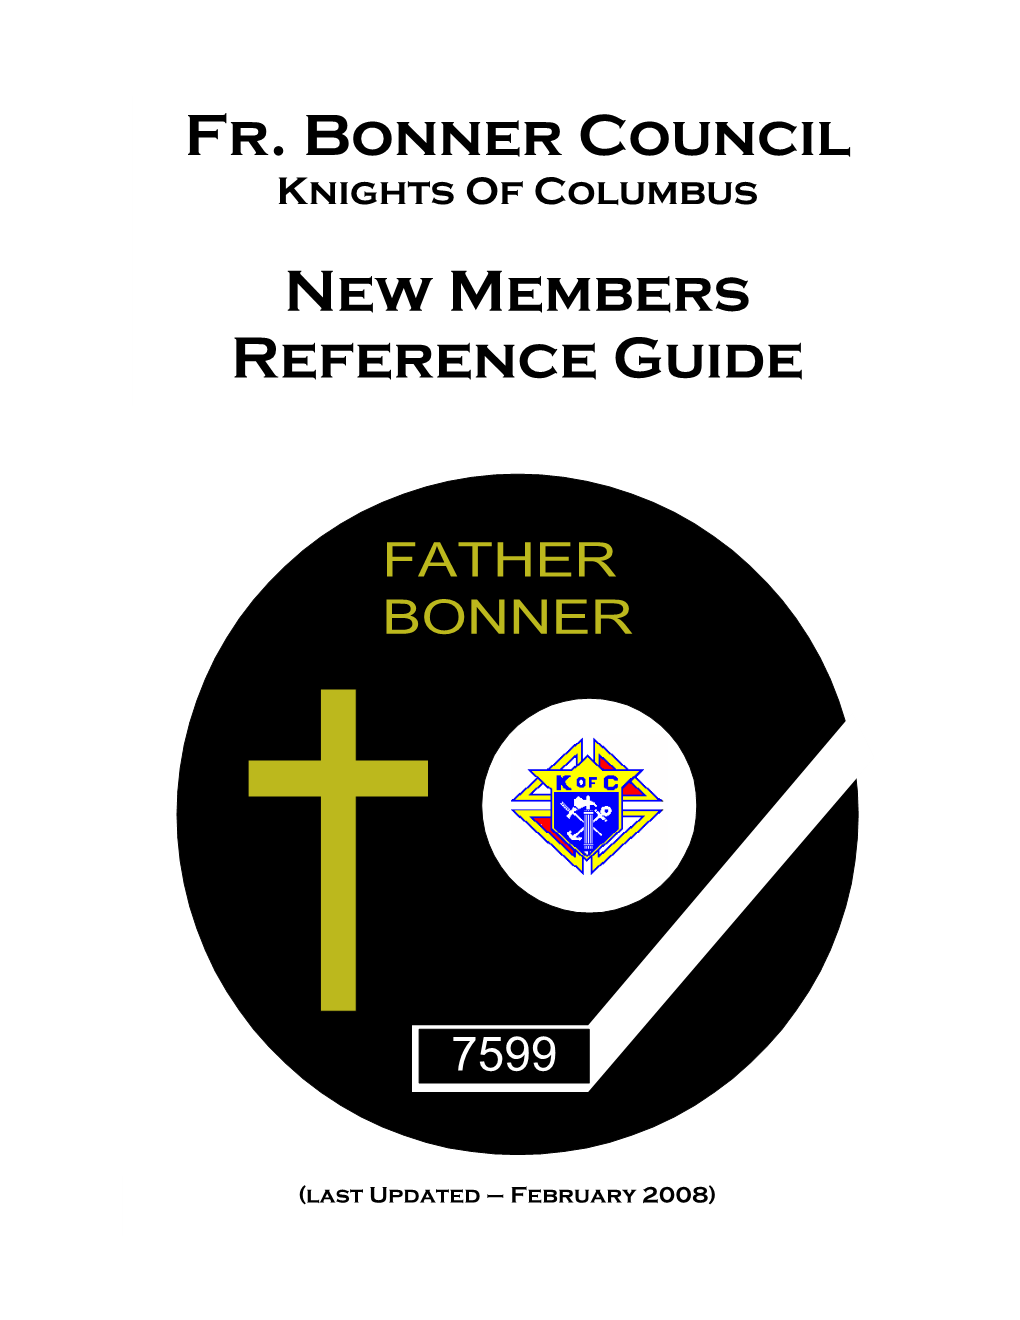 Fr. Bonner Council New Members Reference Guide